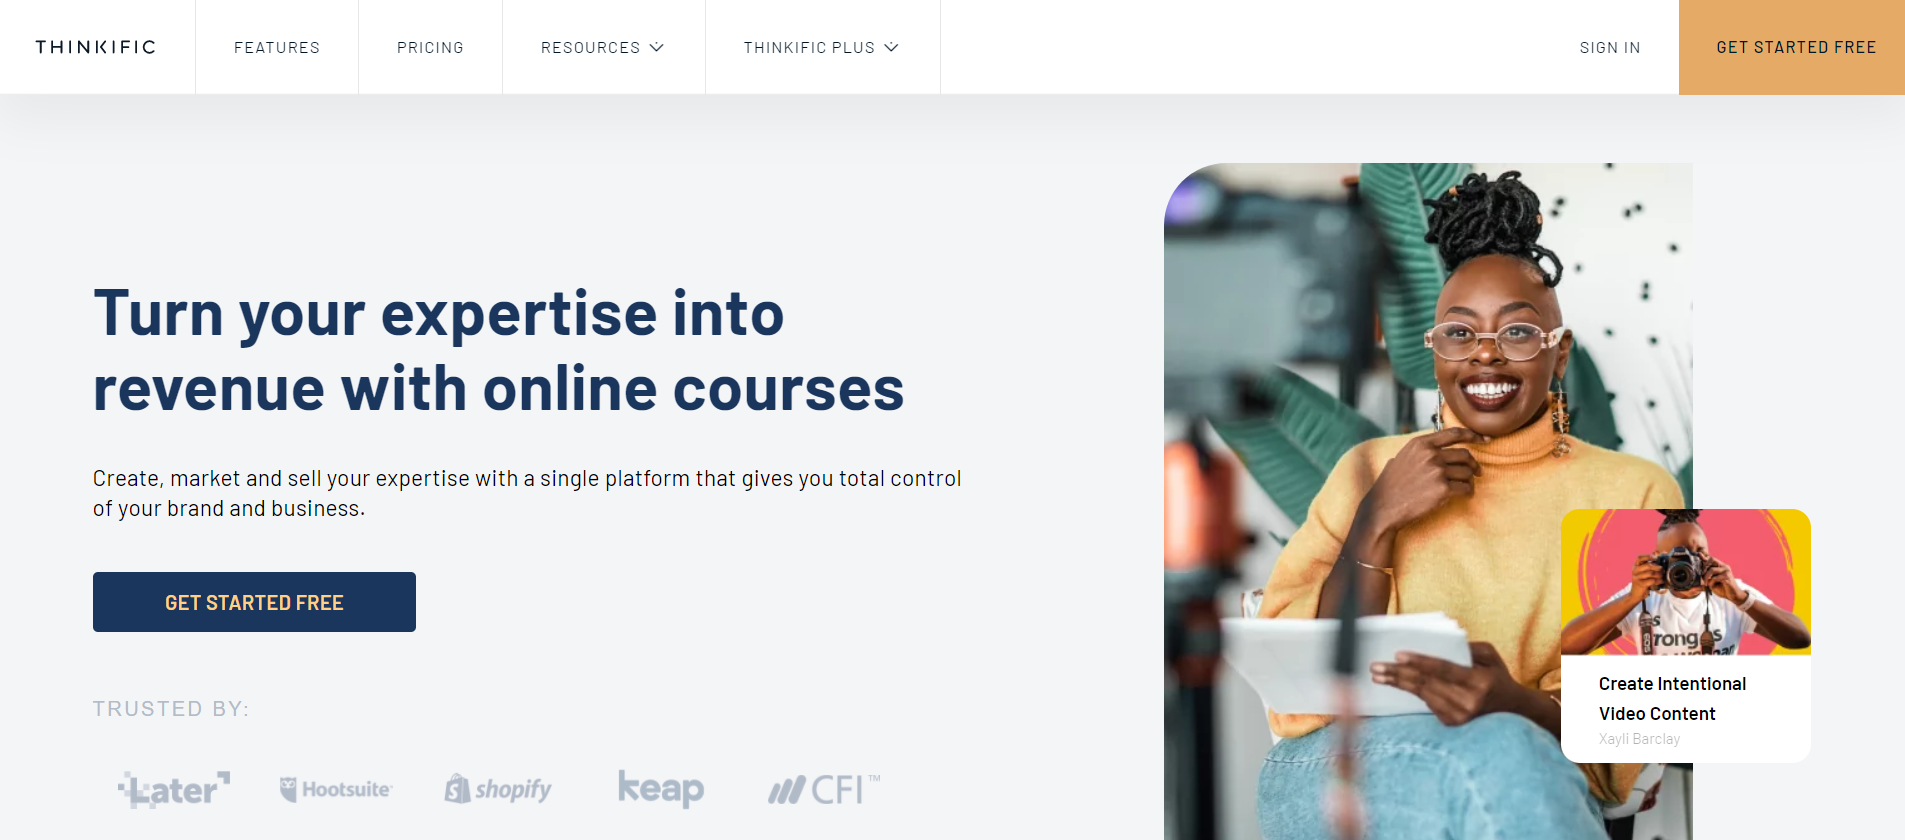 best-online-course-selling-platform-thinkific